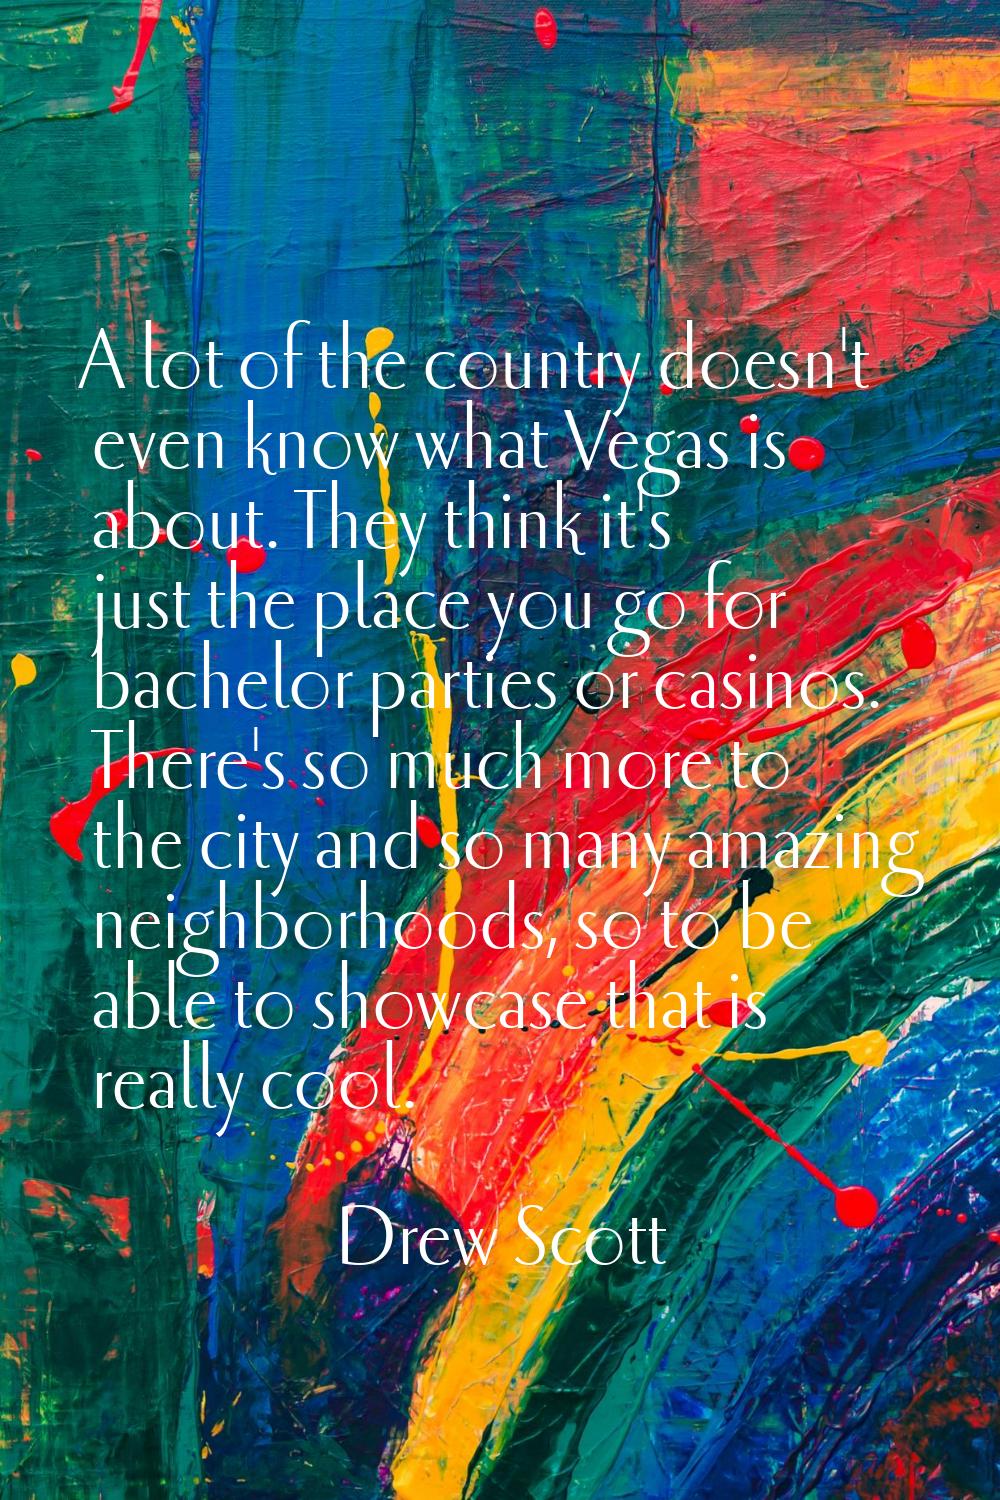 A lot of the country doesn't even know what Vegas is about. They think it's just the place you go f